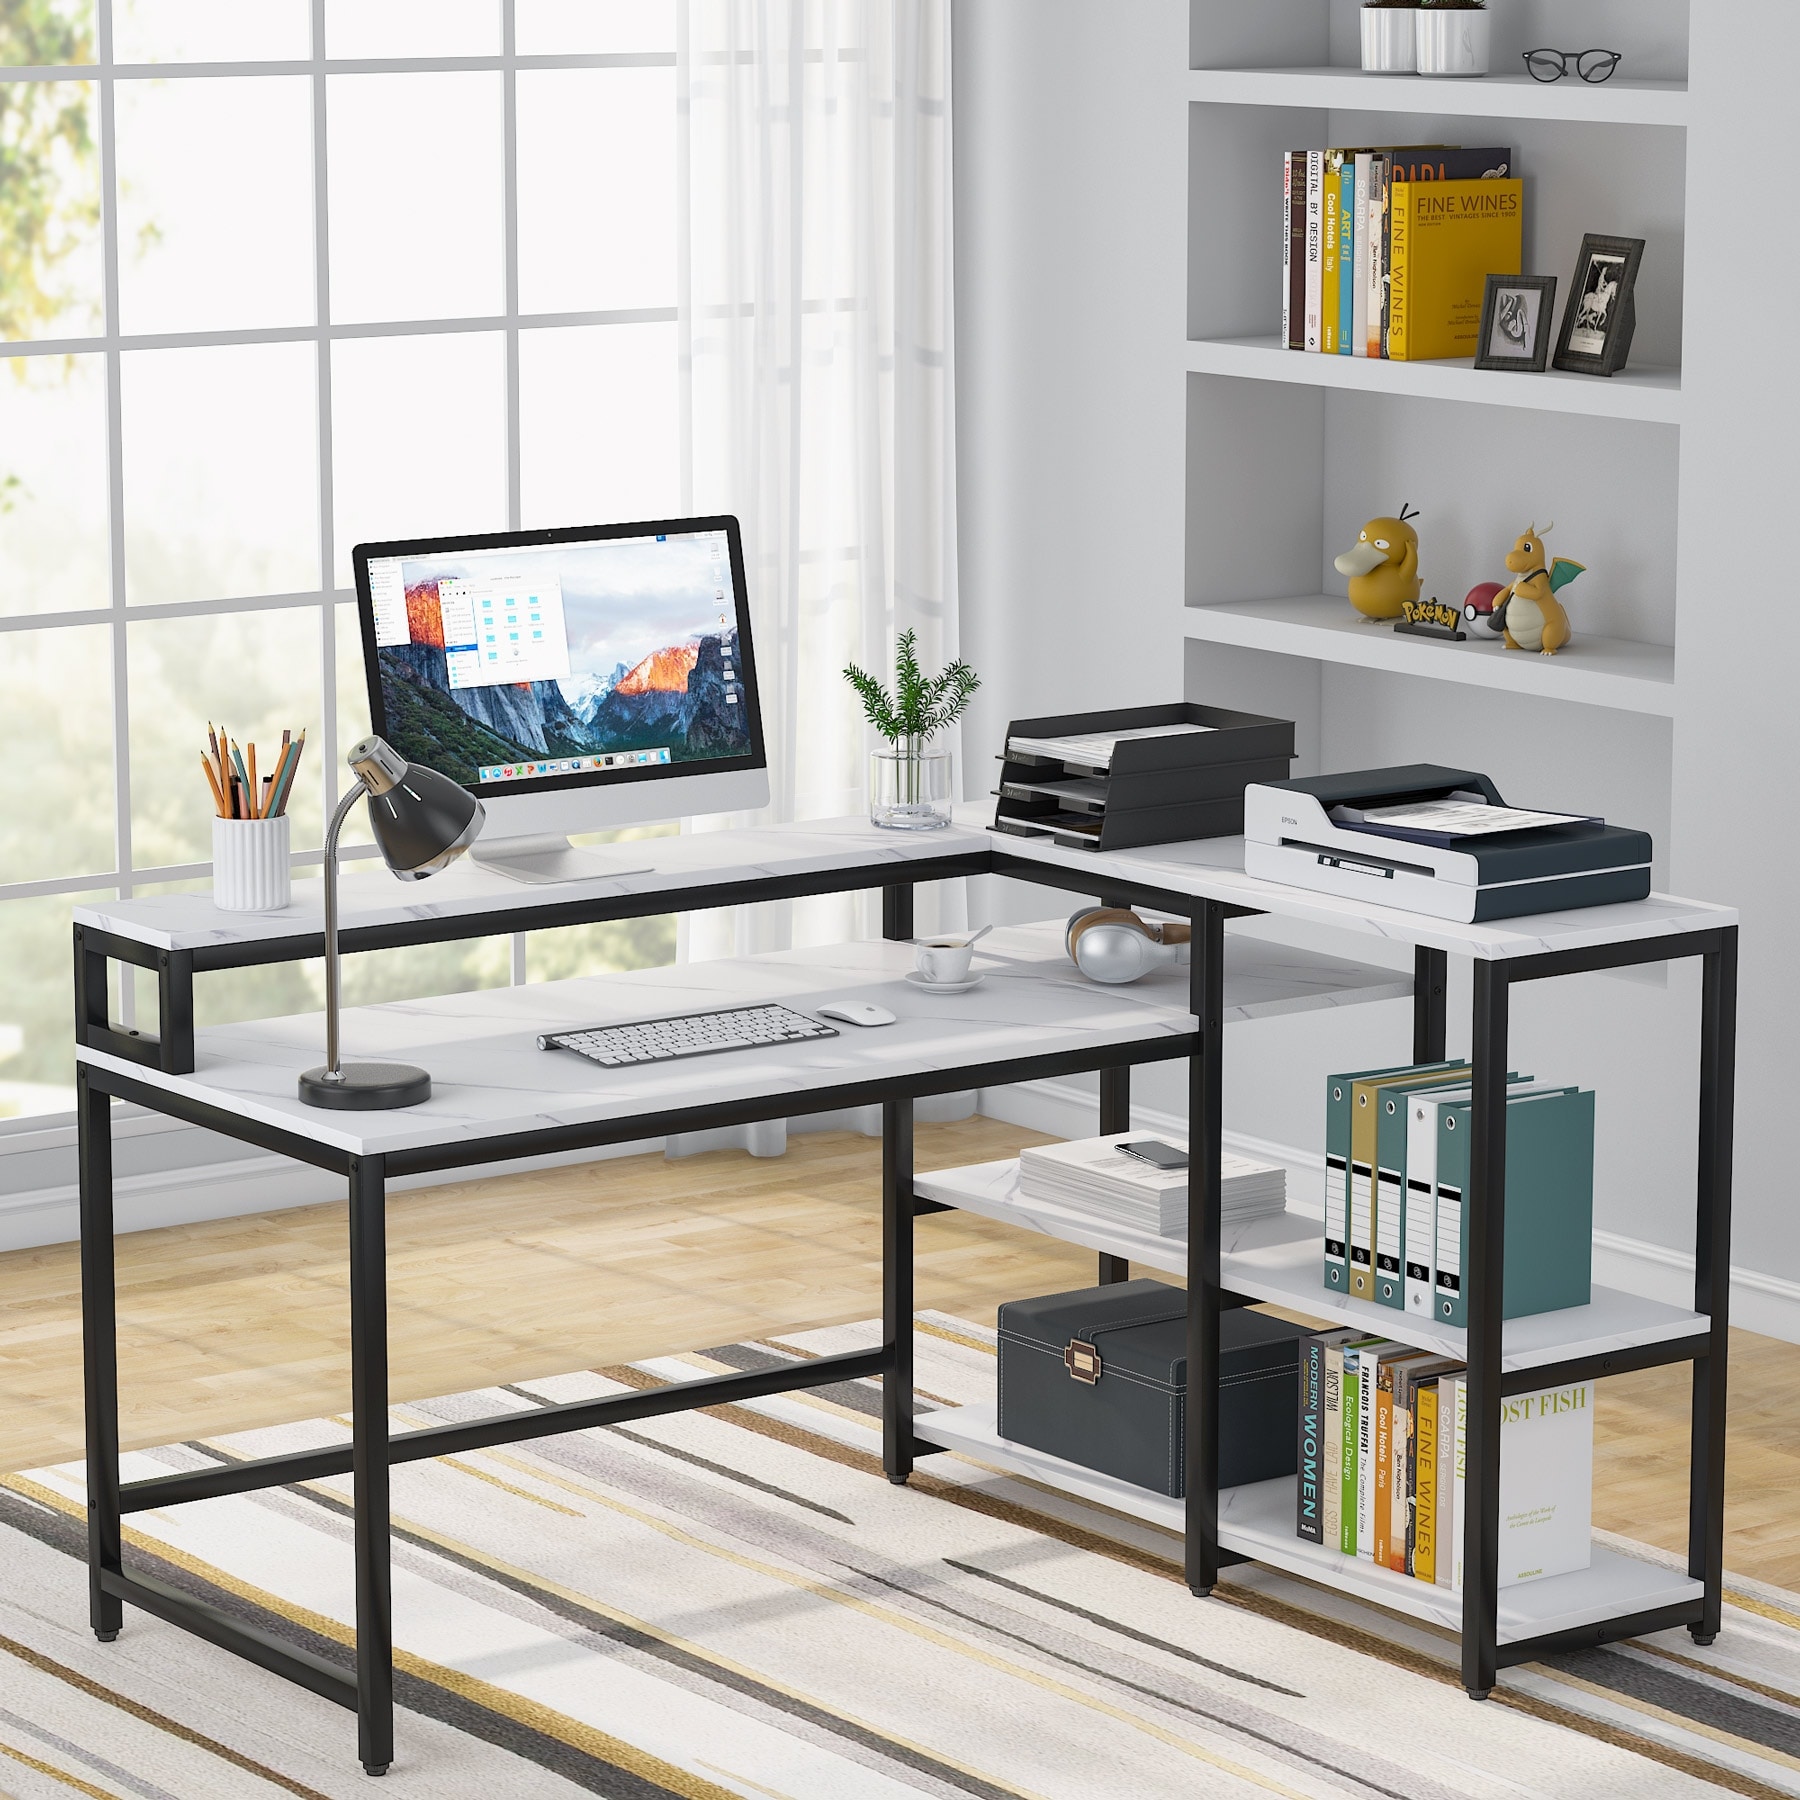 JAMFLY 52 L Shaped Computer Desk with 3-Tier Storage Shelves